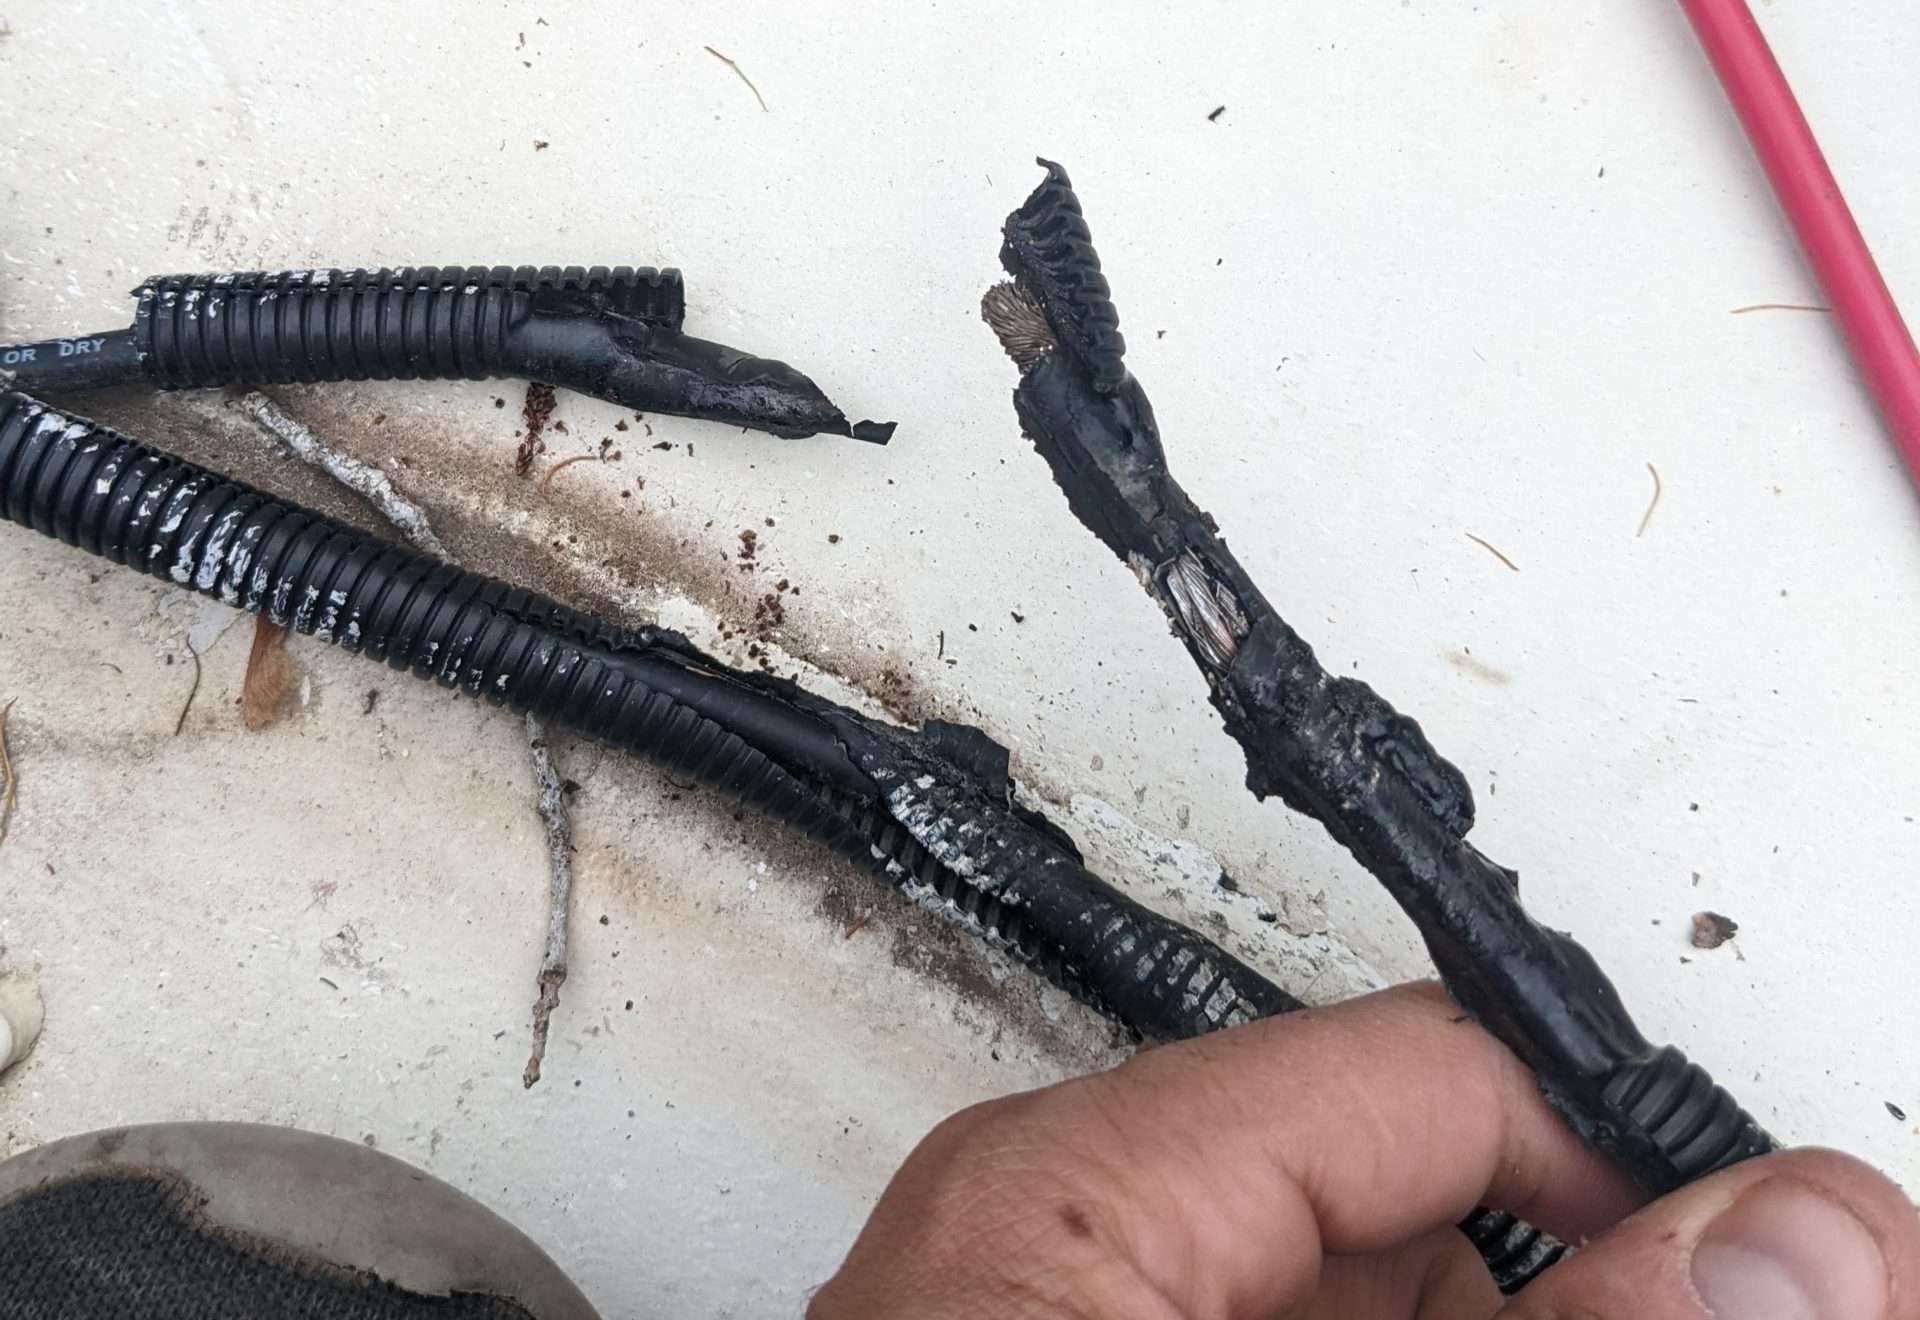 burned RV wires